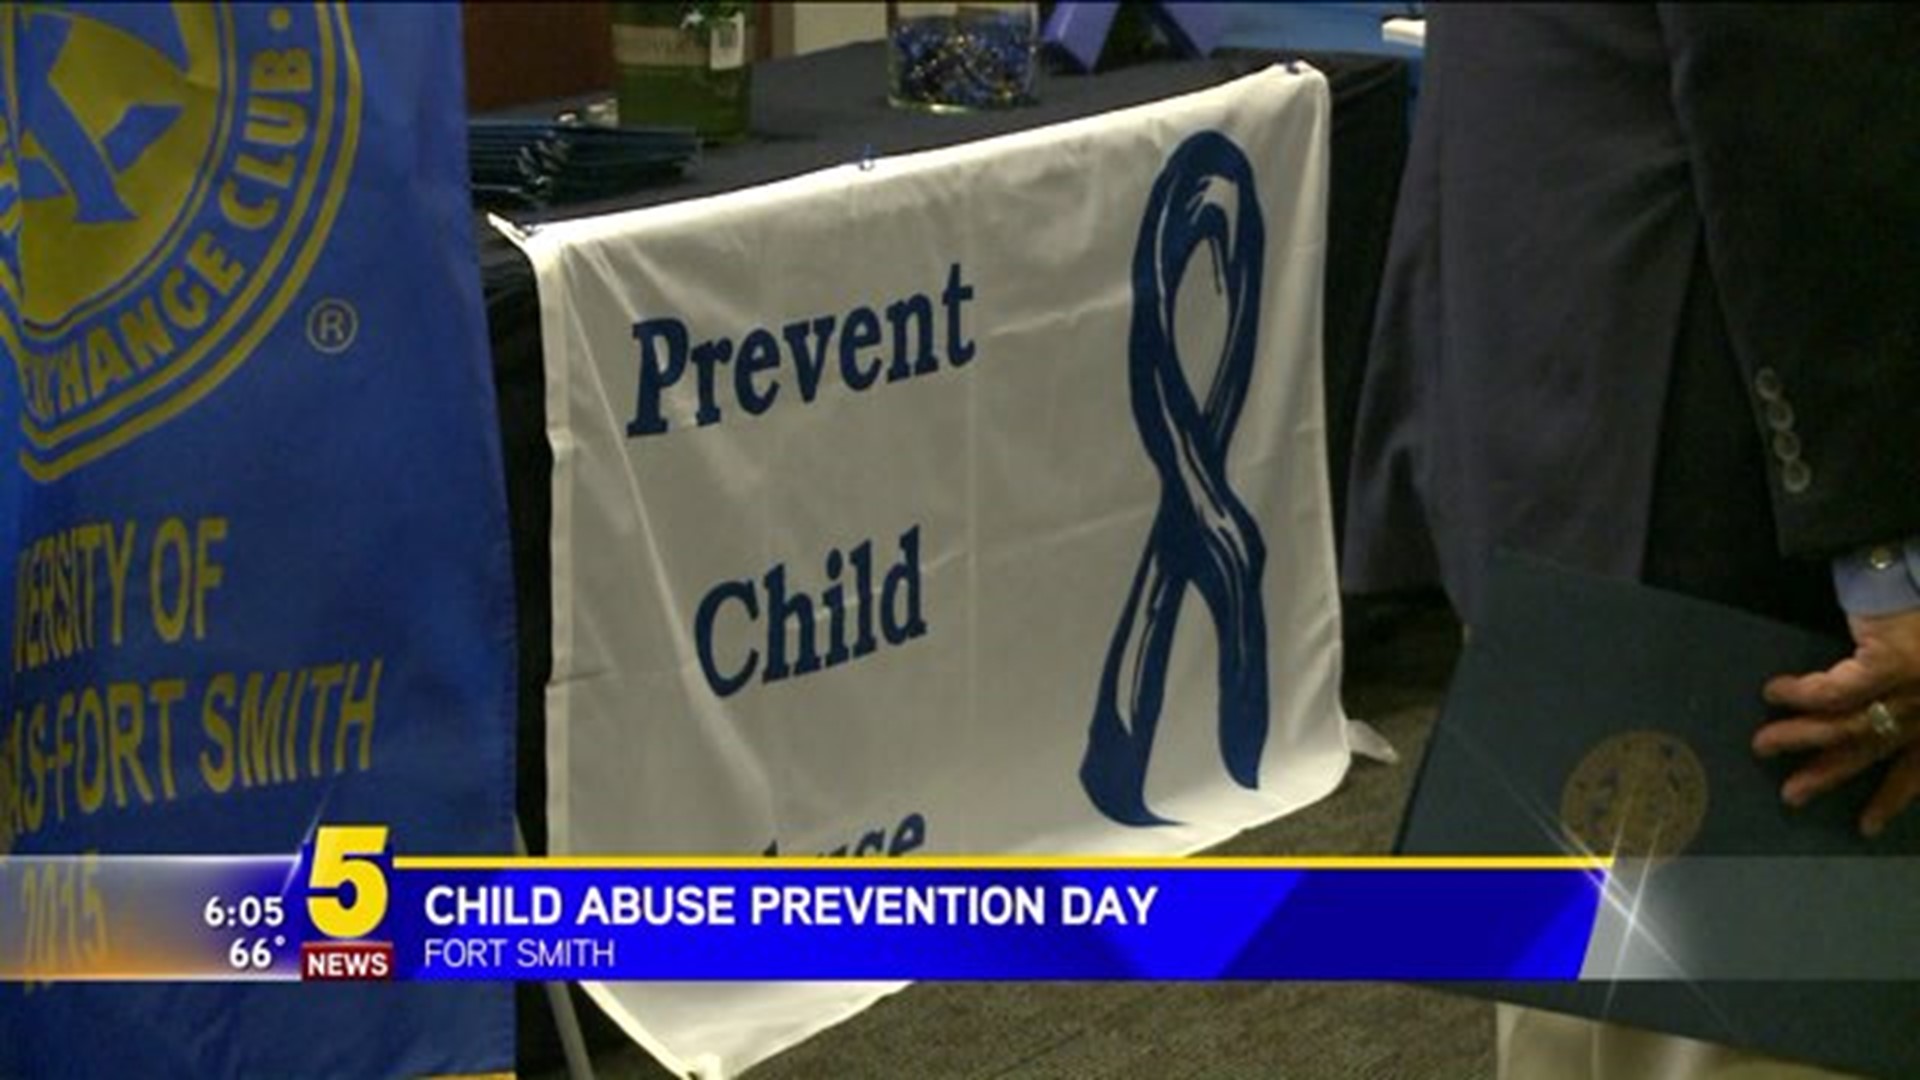 Child Abuse Prevention Day